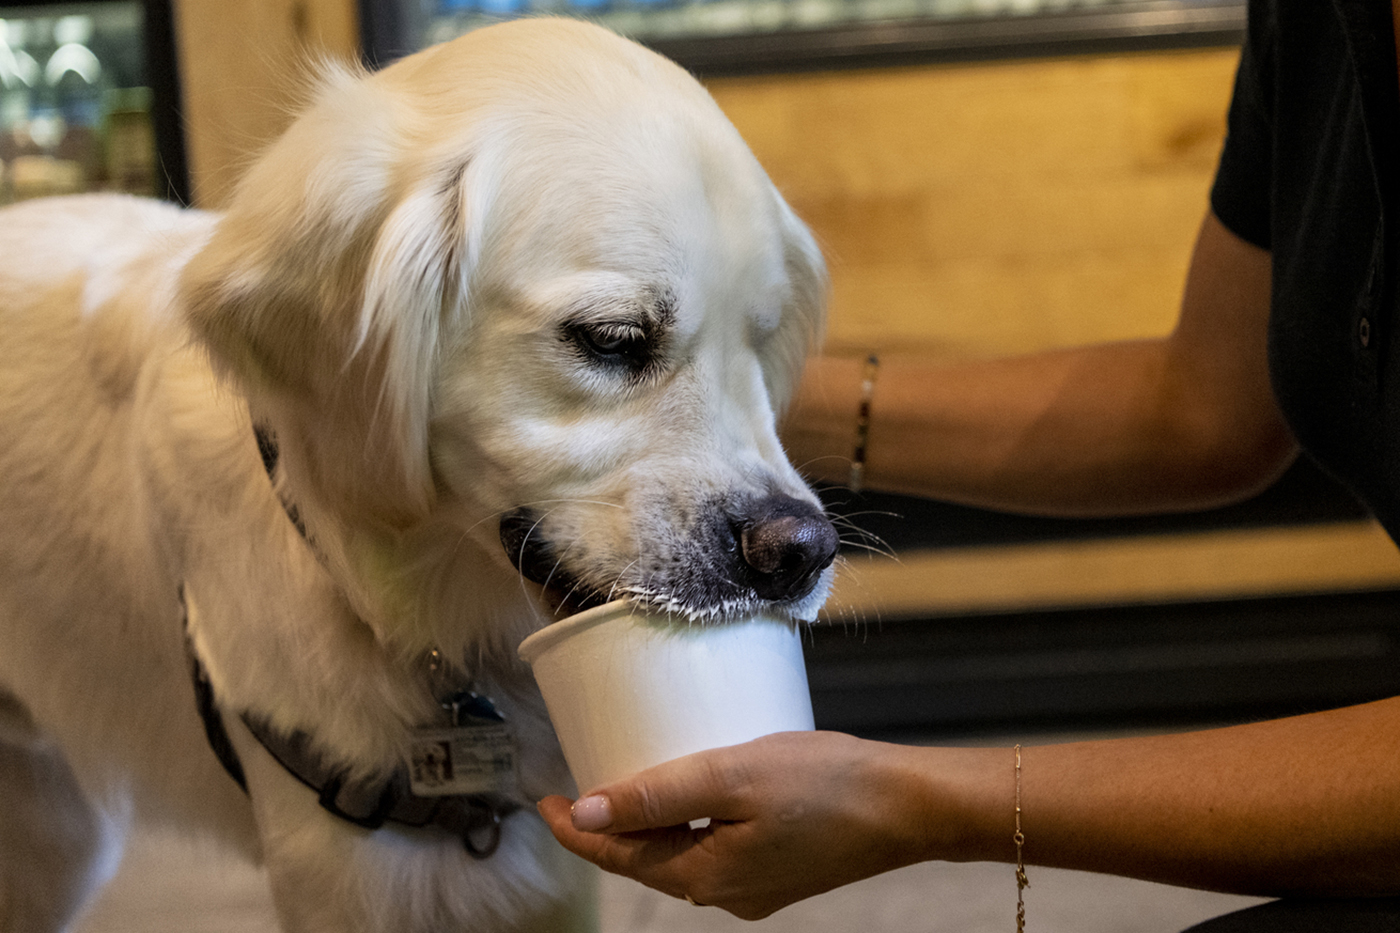 Cooper enjoying a pup cup from Starbucks